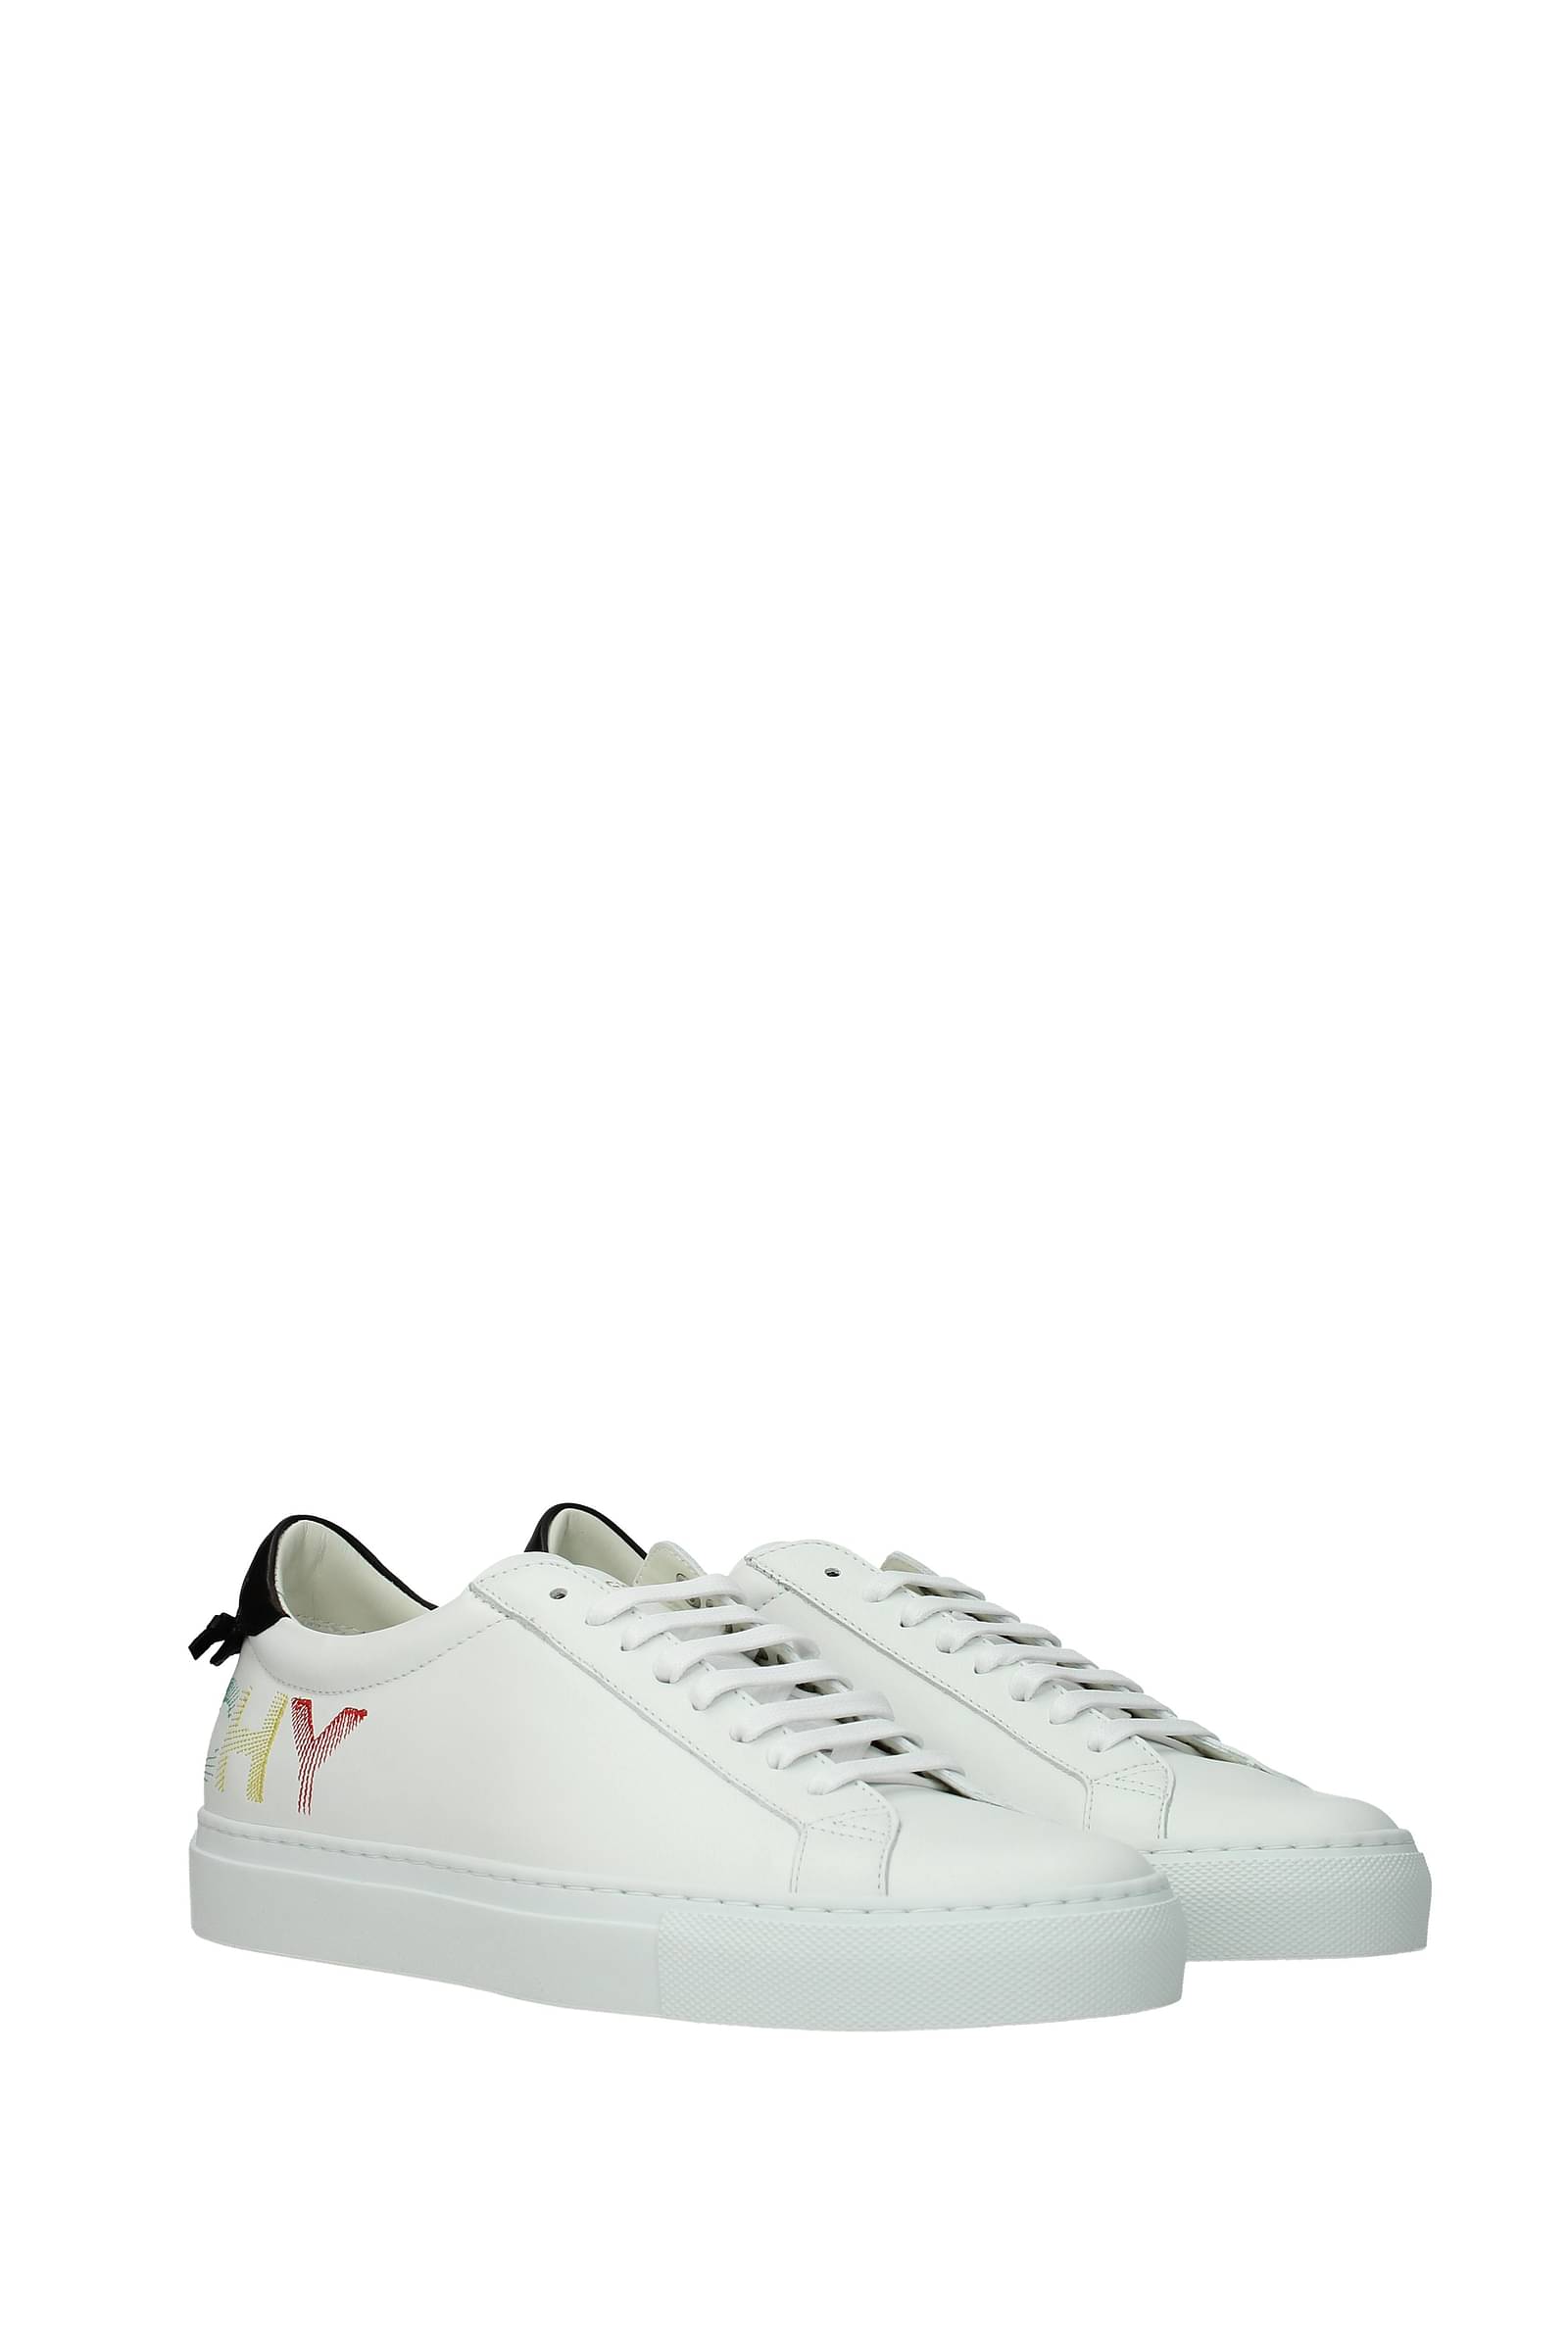 Givenchy Sneakers Men BH004JH0T3116 Leather 550€